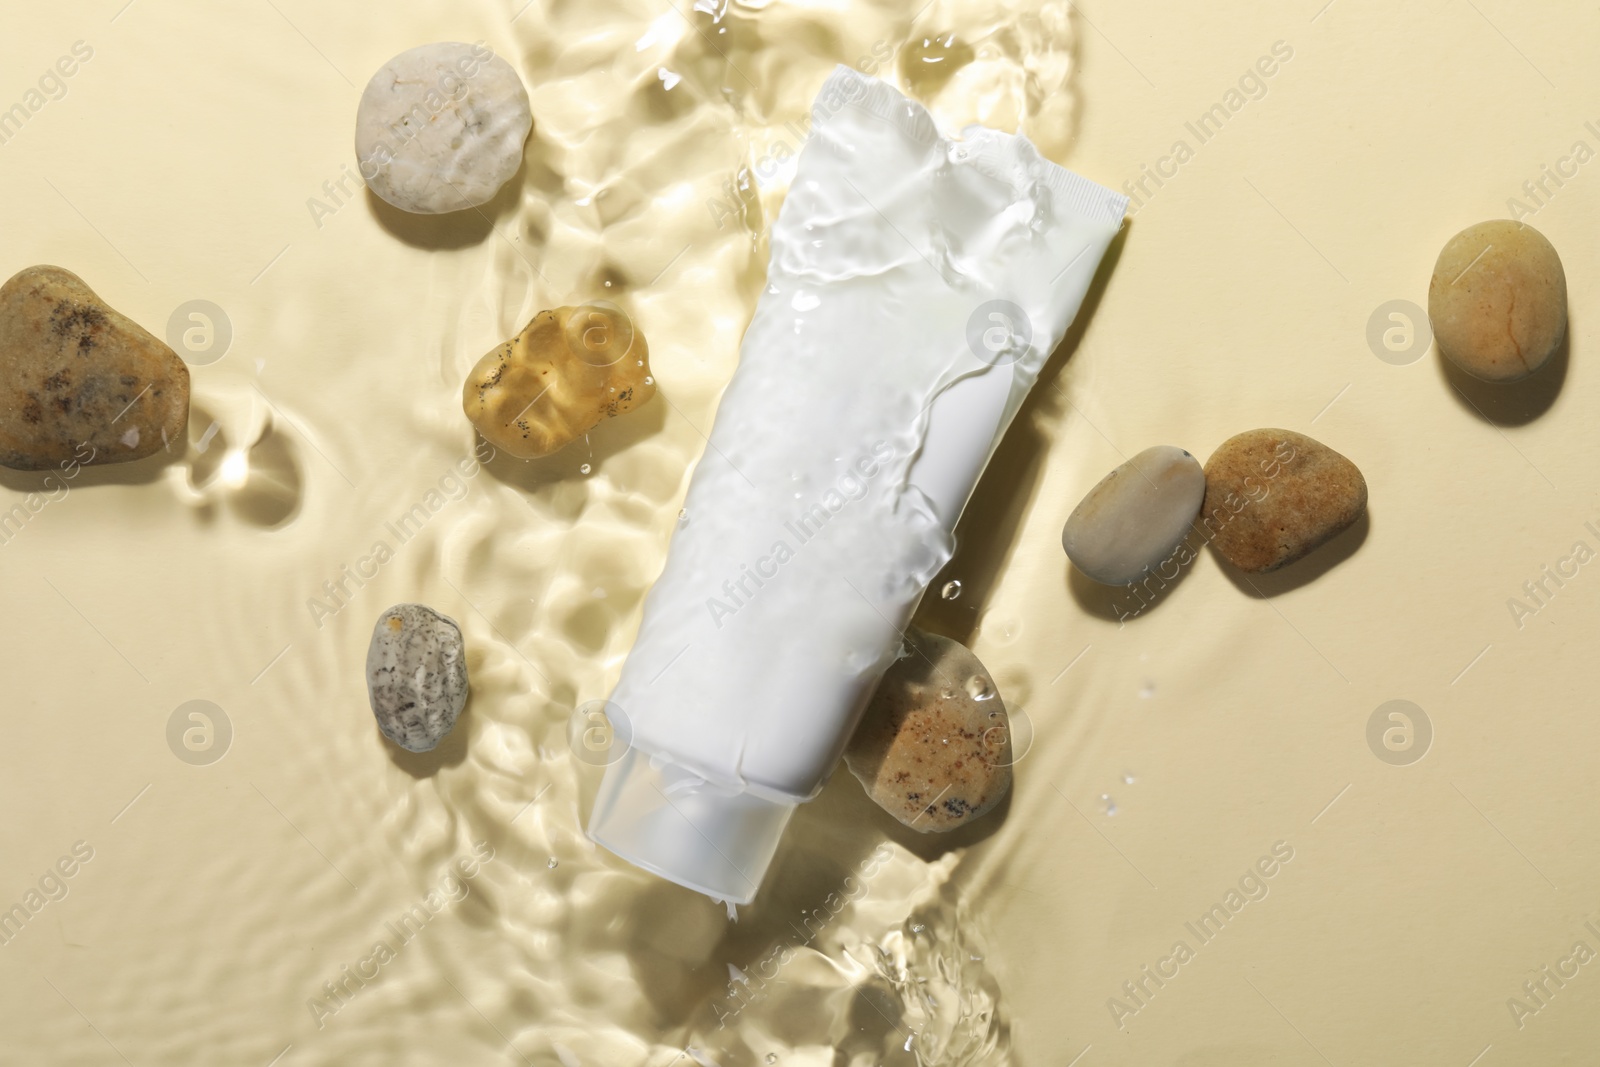 Photo of Tube of face cleansing product and stones in water against beige background, flat lay